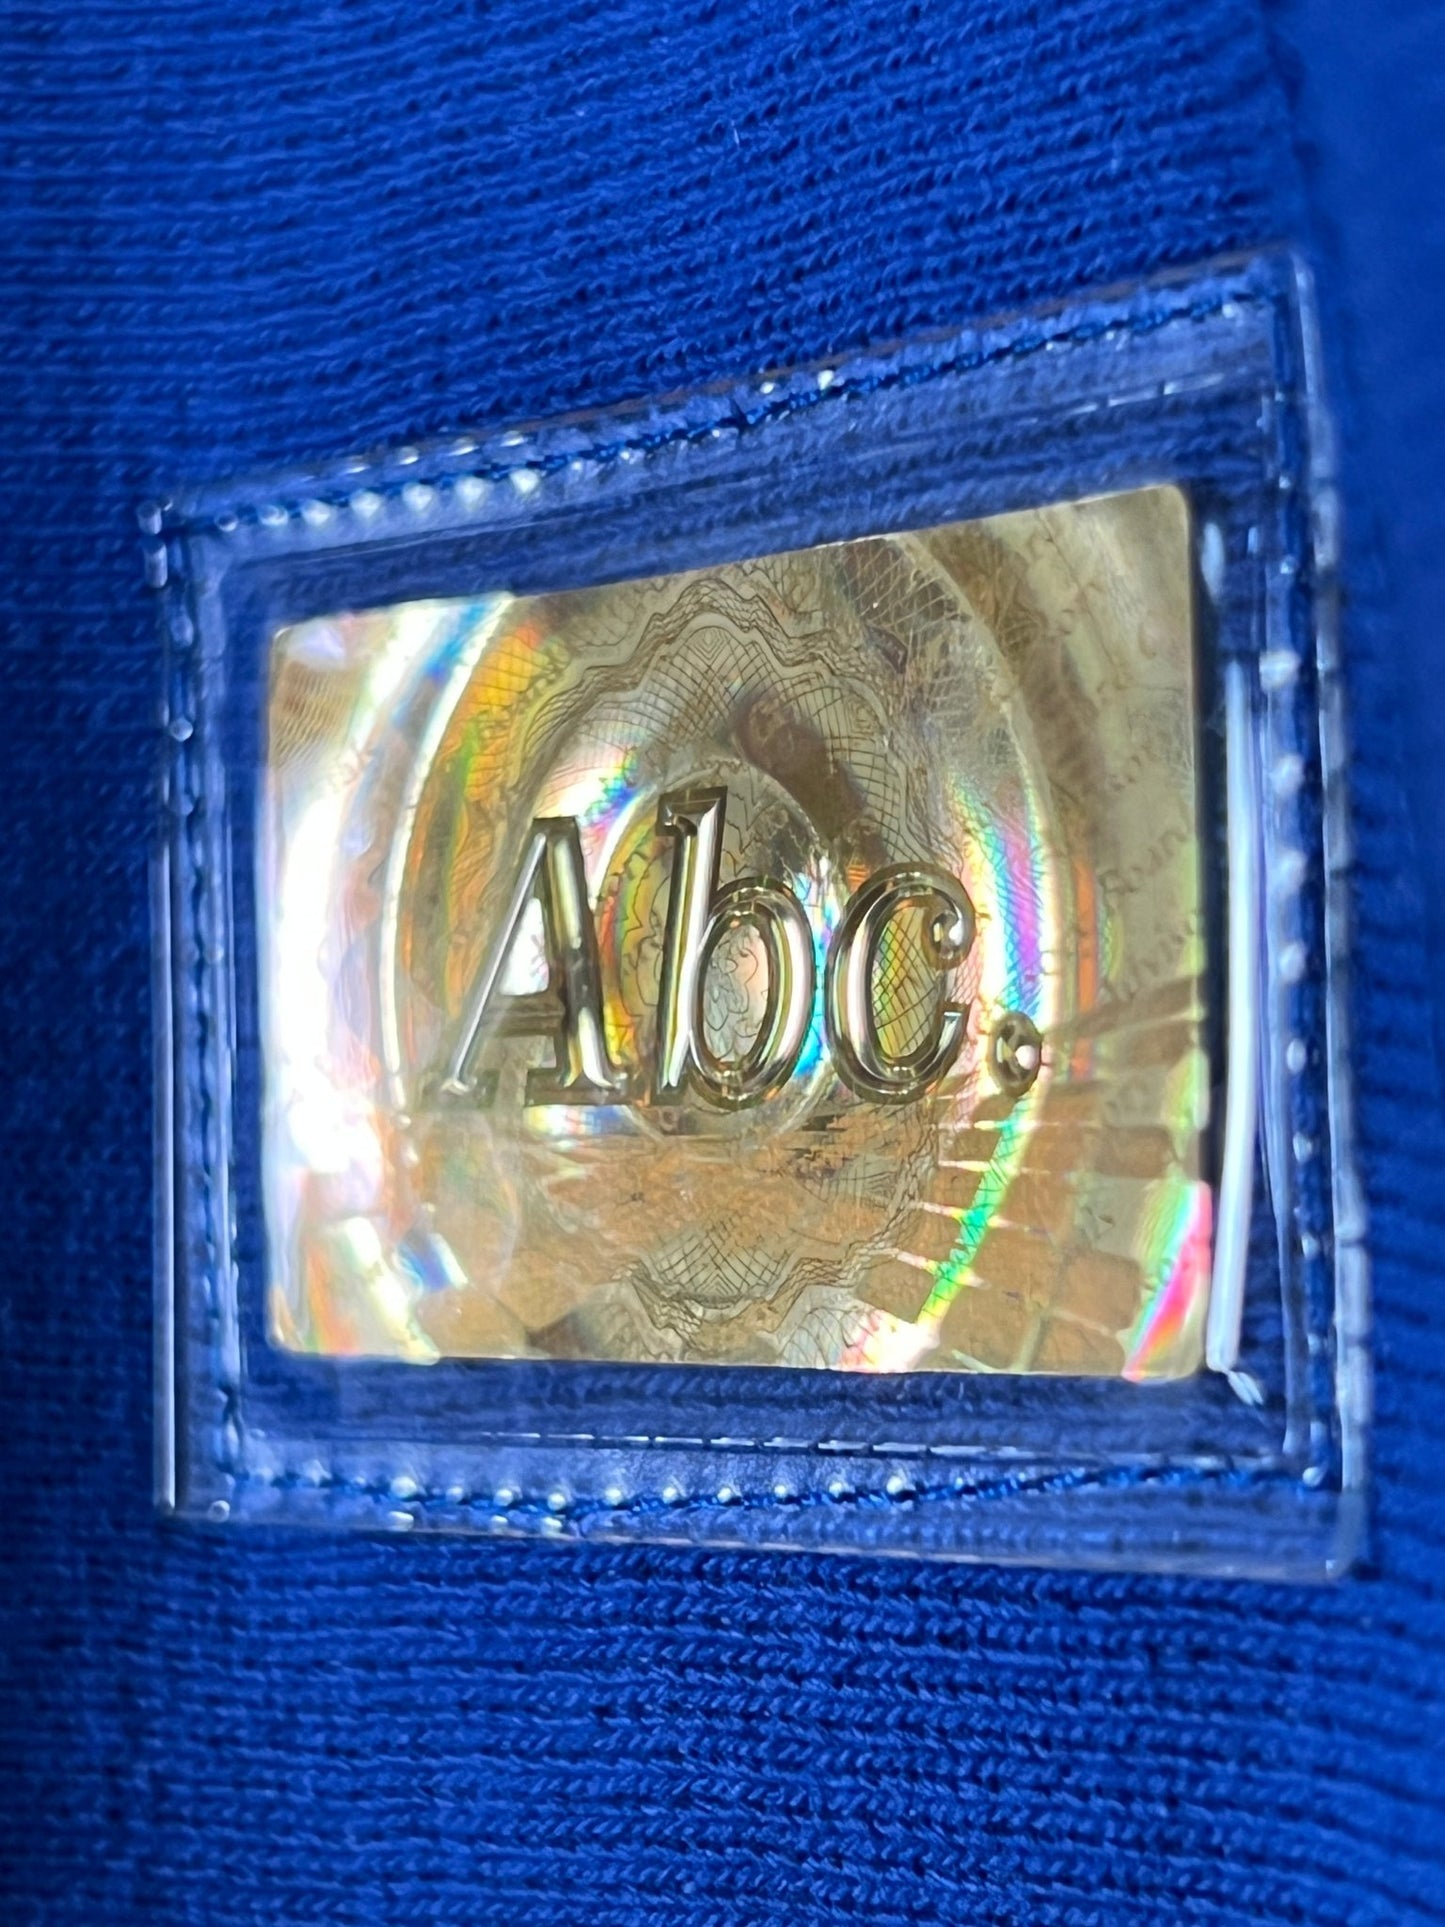 A close up of an ADVISORY BOARD CRYSTALS logo on a cotton hoodie in Los Angeles.